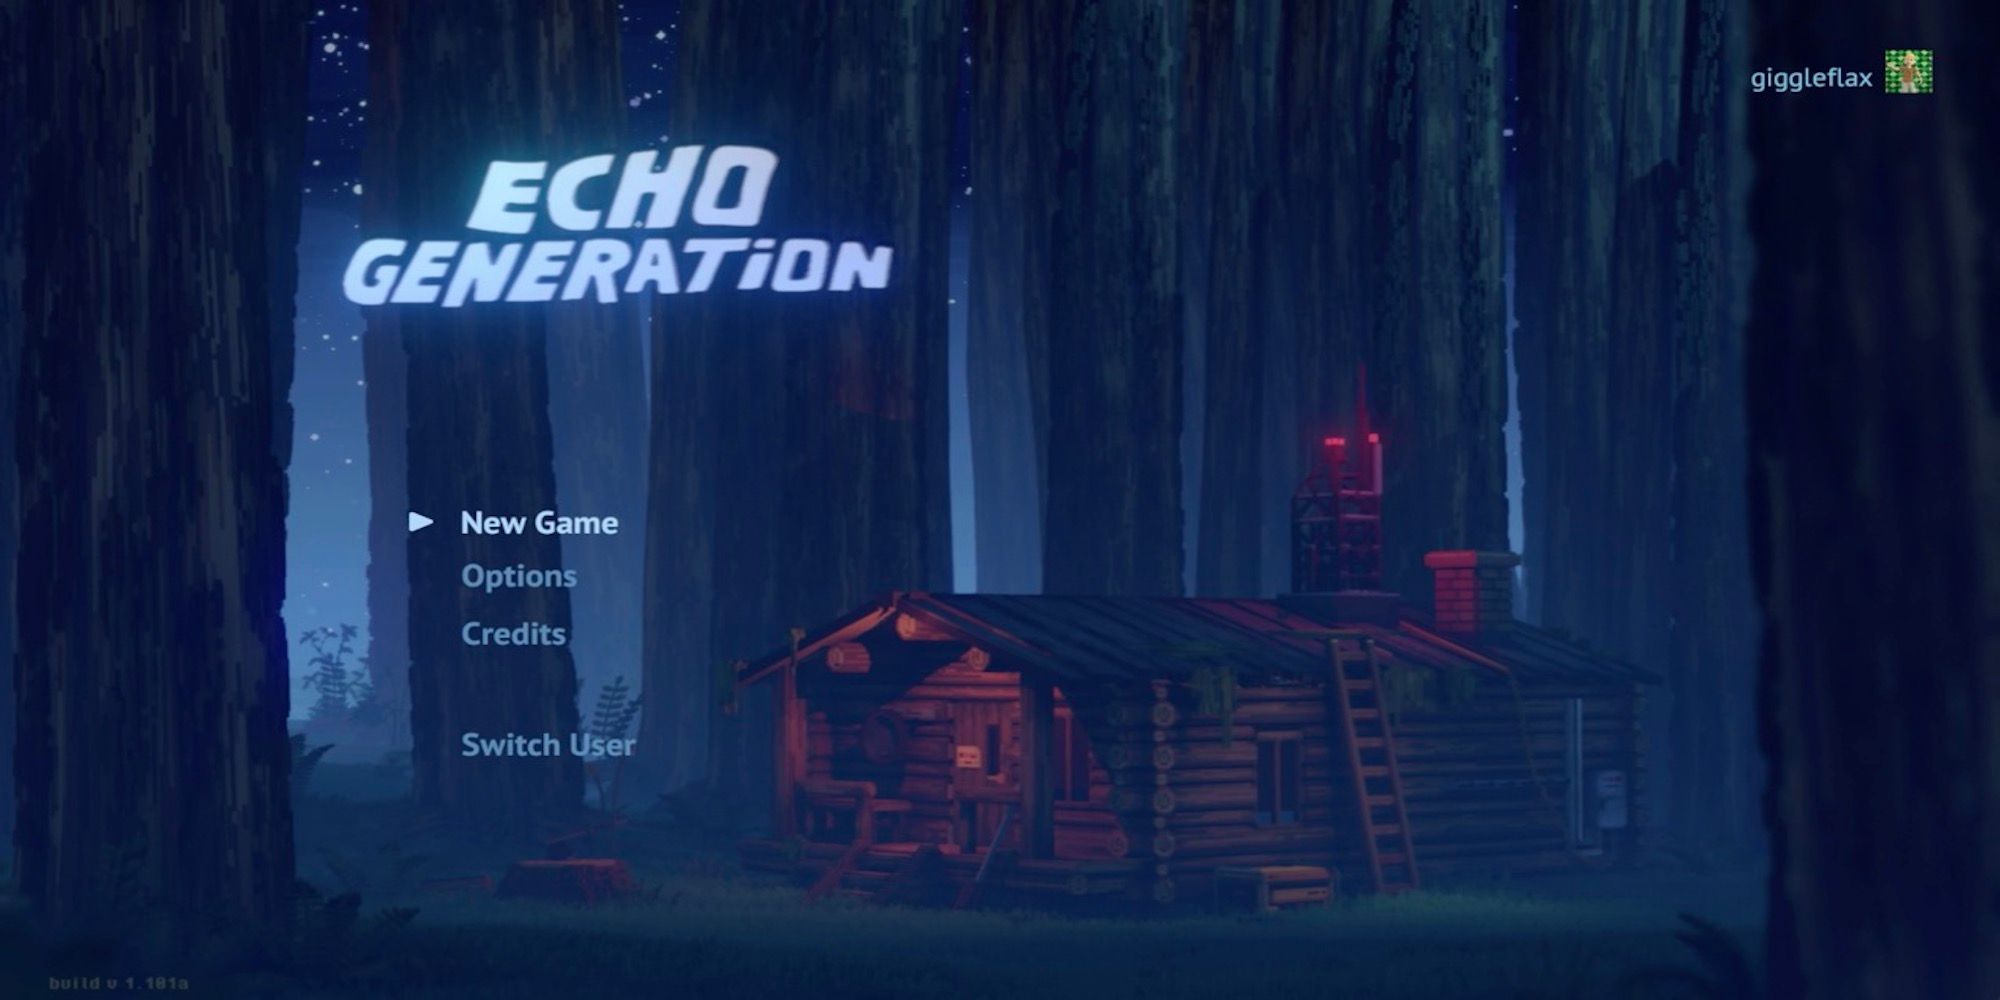 The title screen from Echo Generation